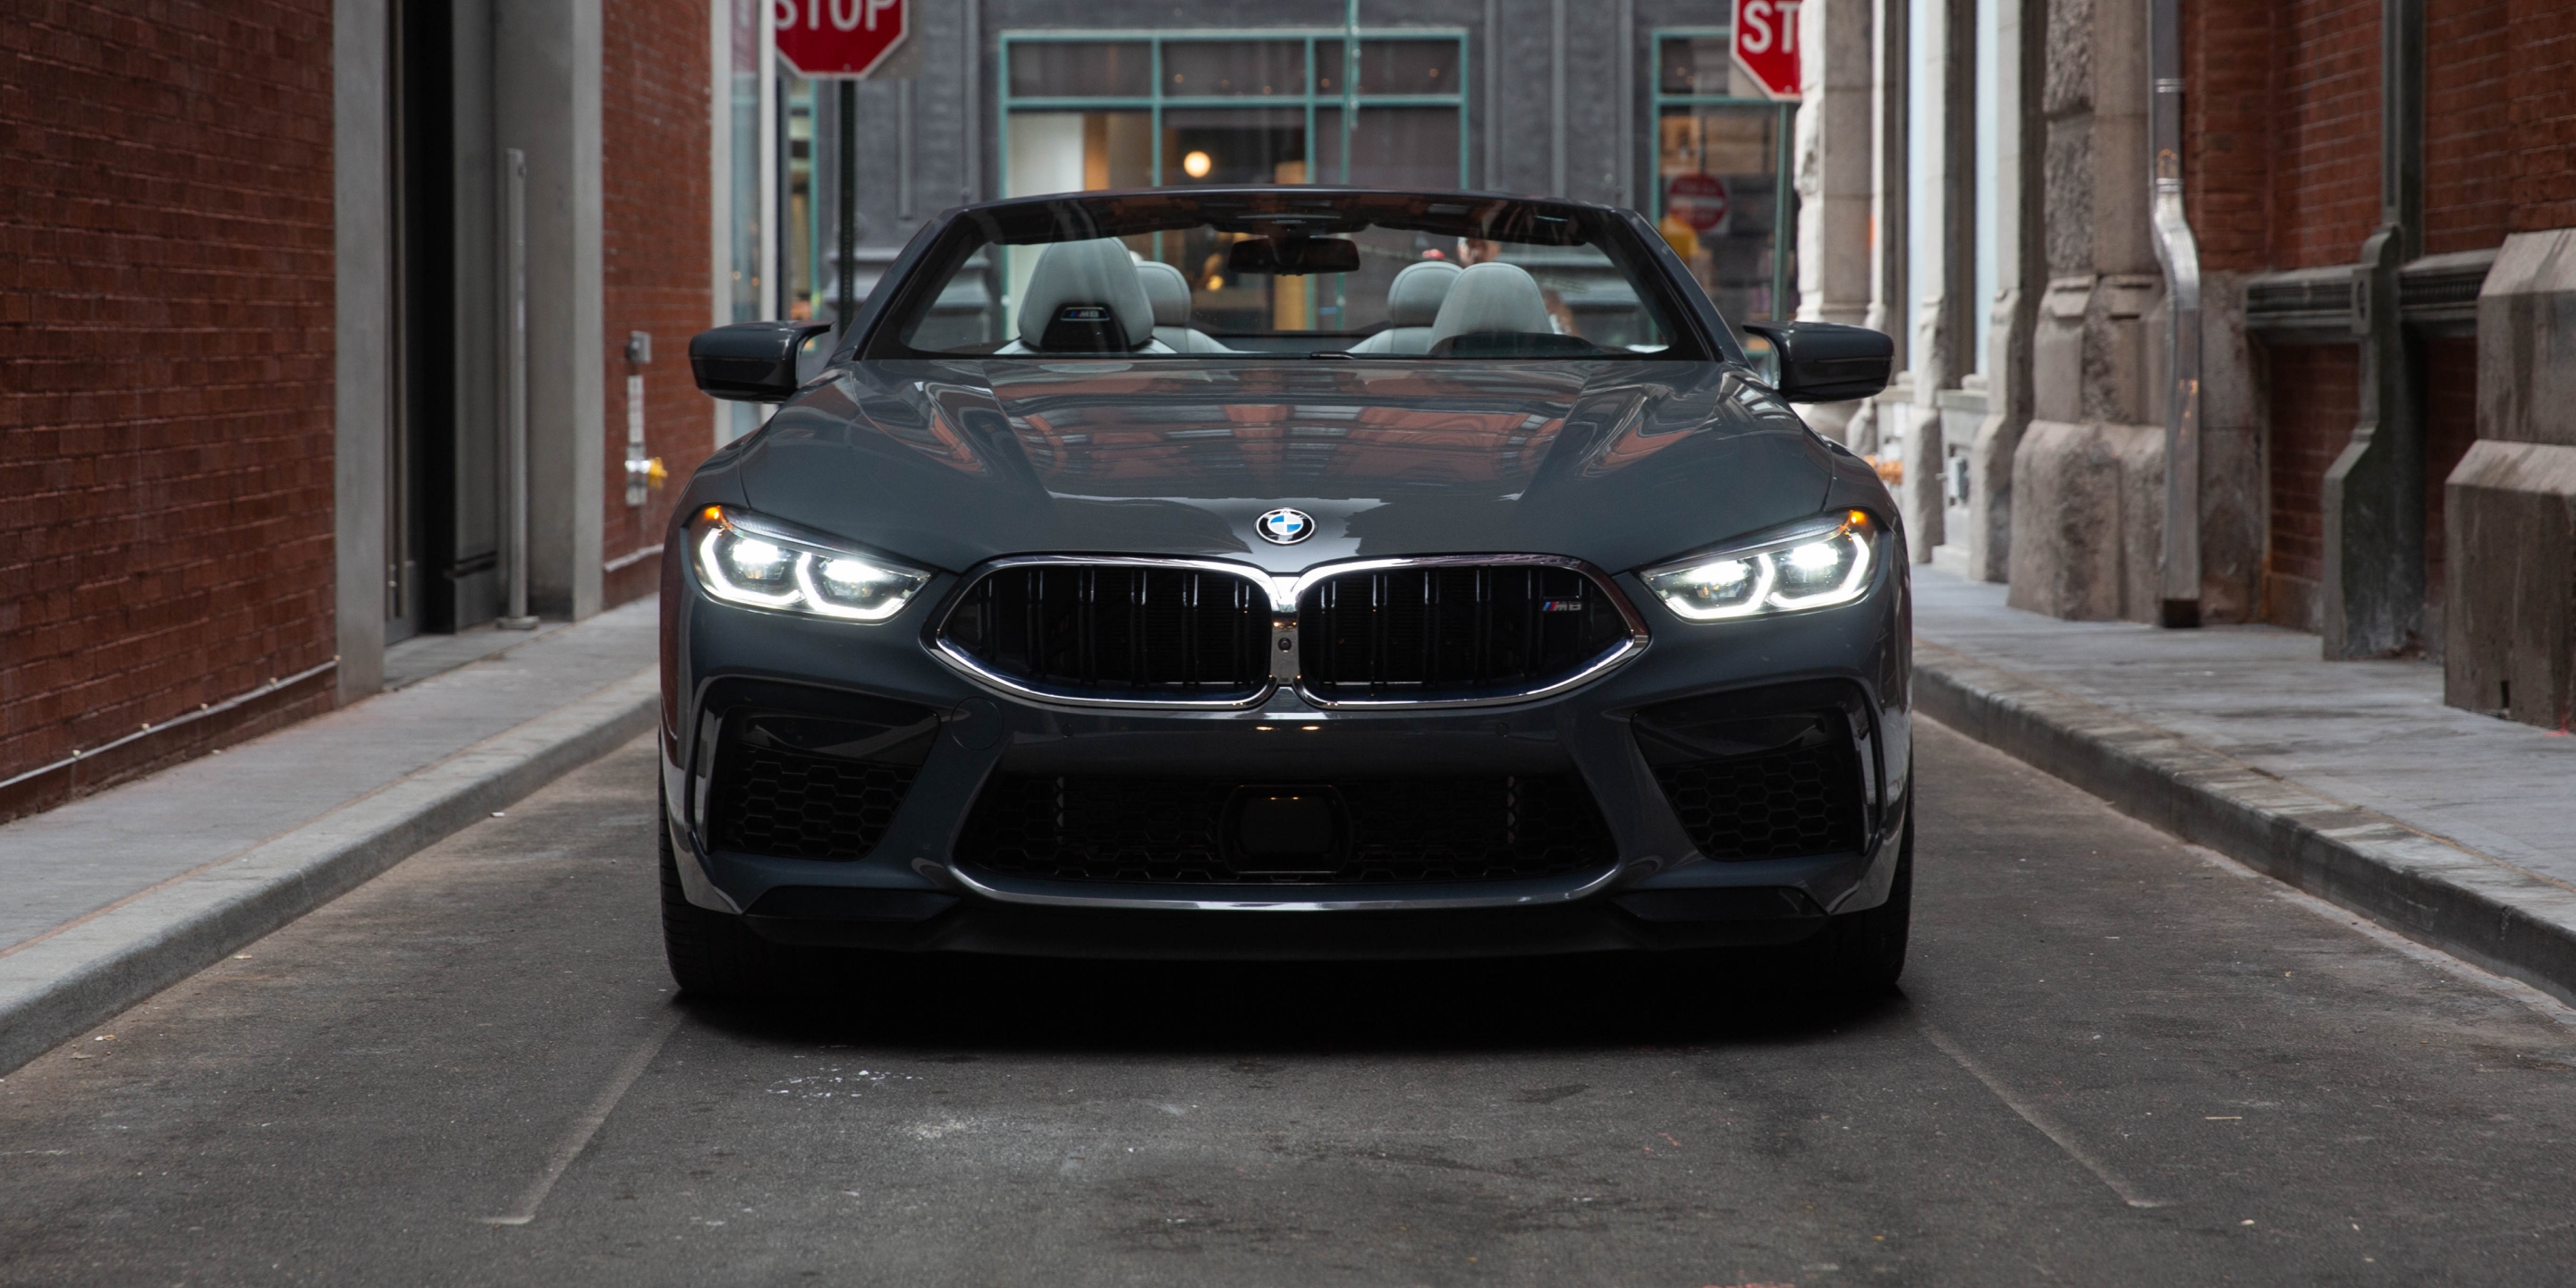 RealCar BMW 840i Convertible for rental